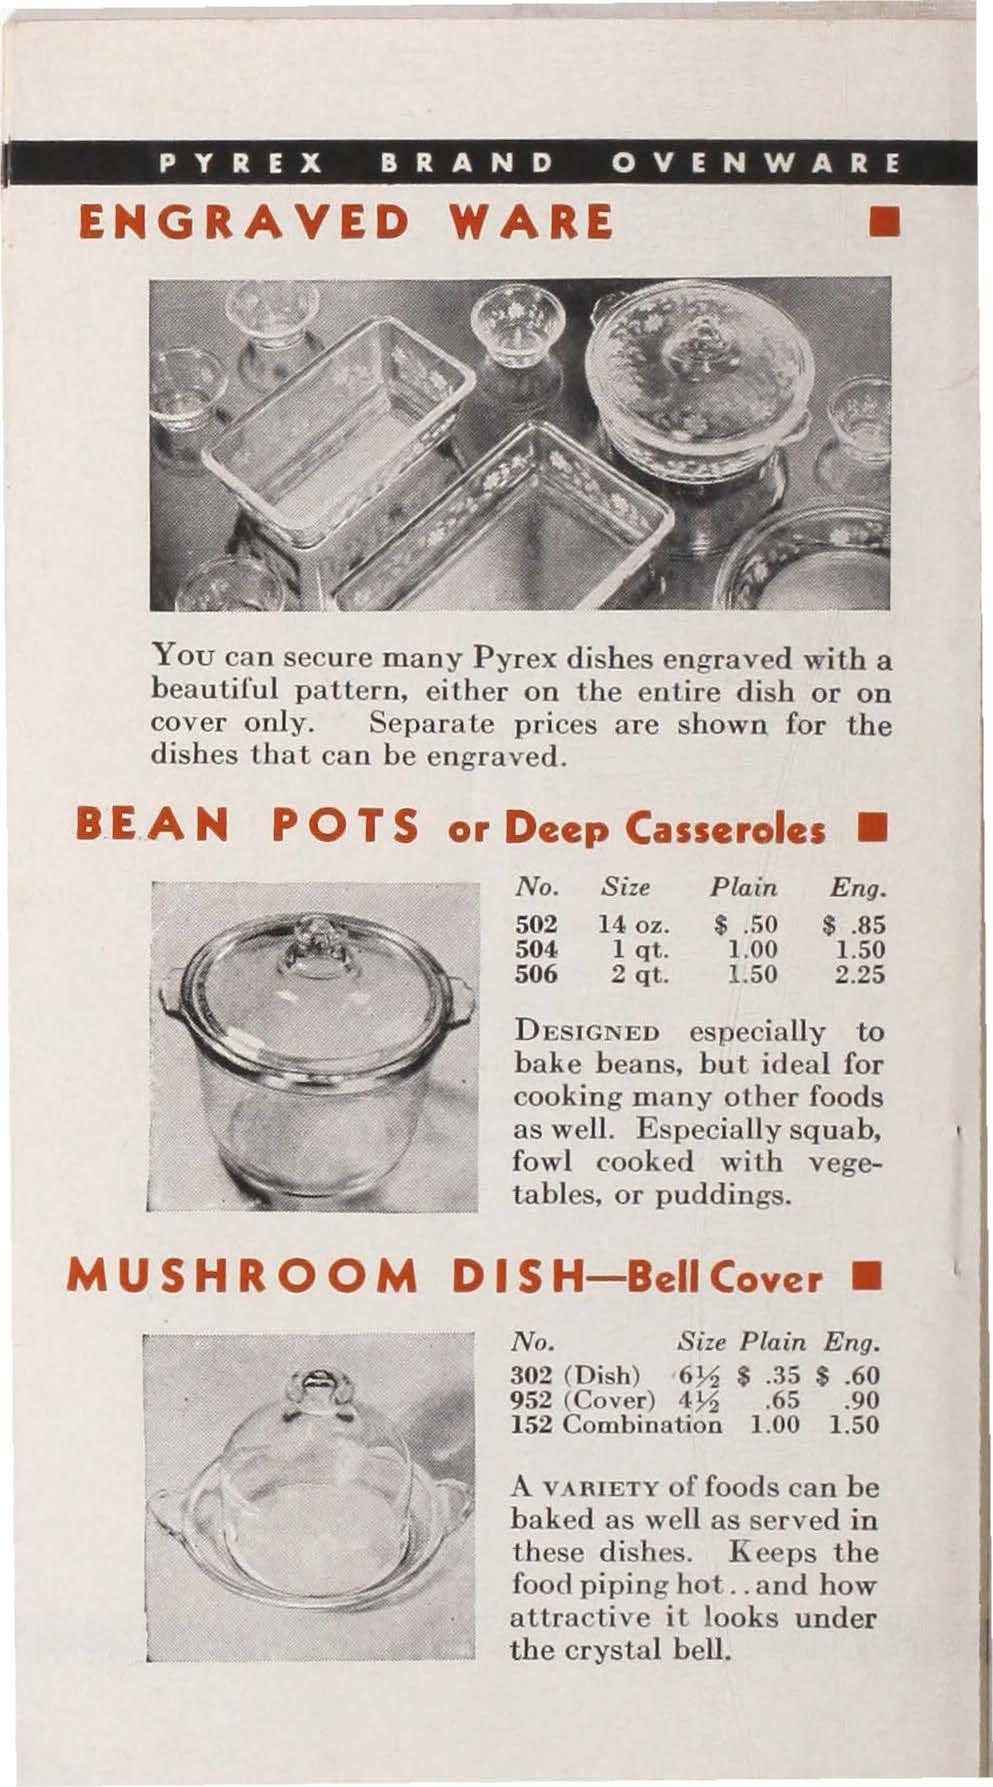 PYREX BRAND OVENWARE ENGRAVED WARE You can secu re many Pyrex dishes engraved with a beautiful pallern, eith er on the ent ire dish or on cover only.